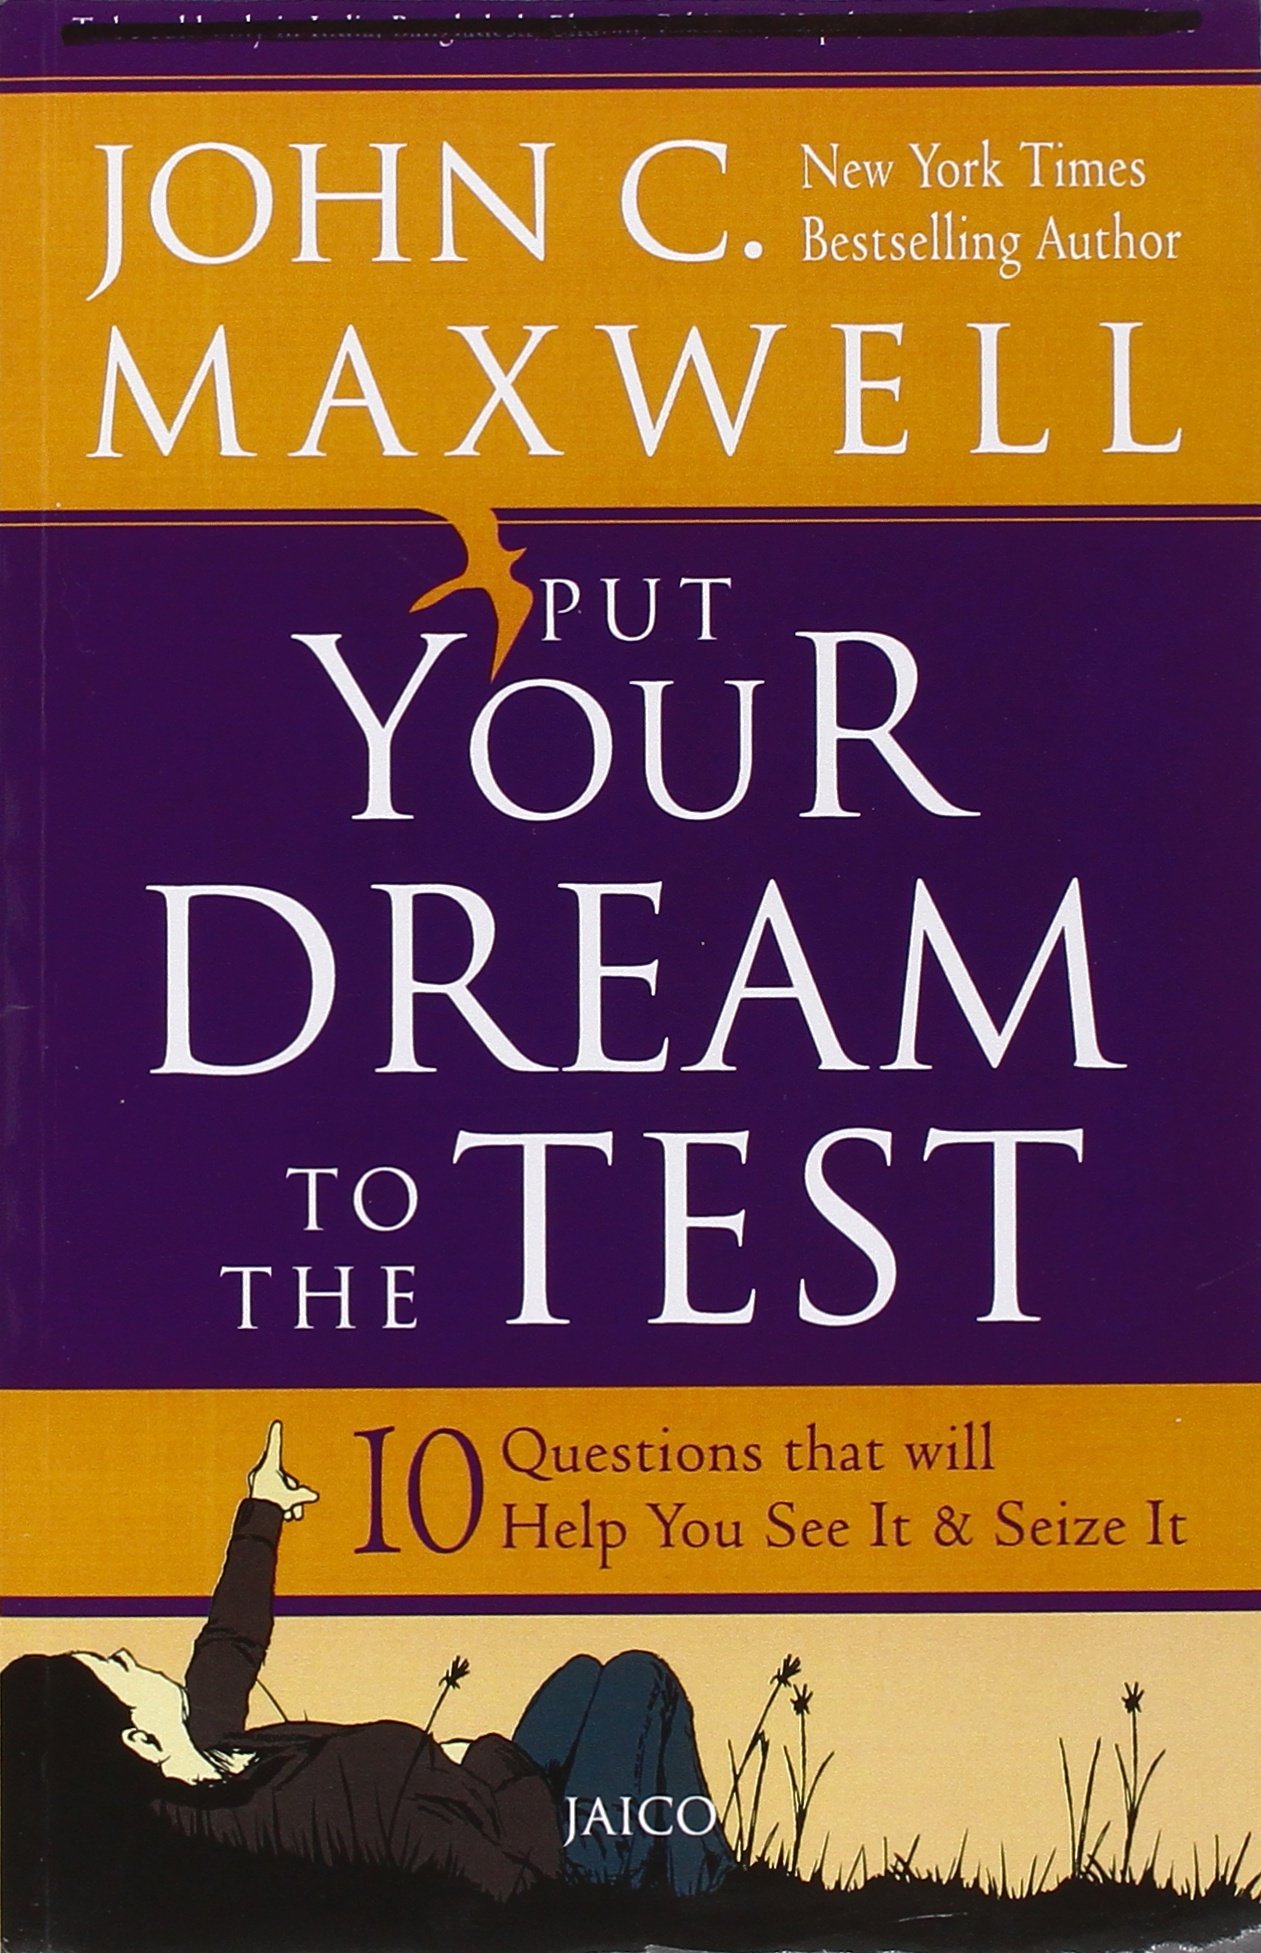 Put Your Dream To The Test